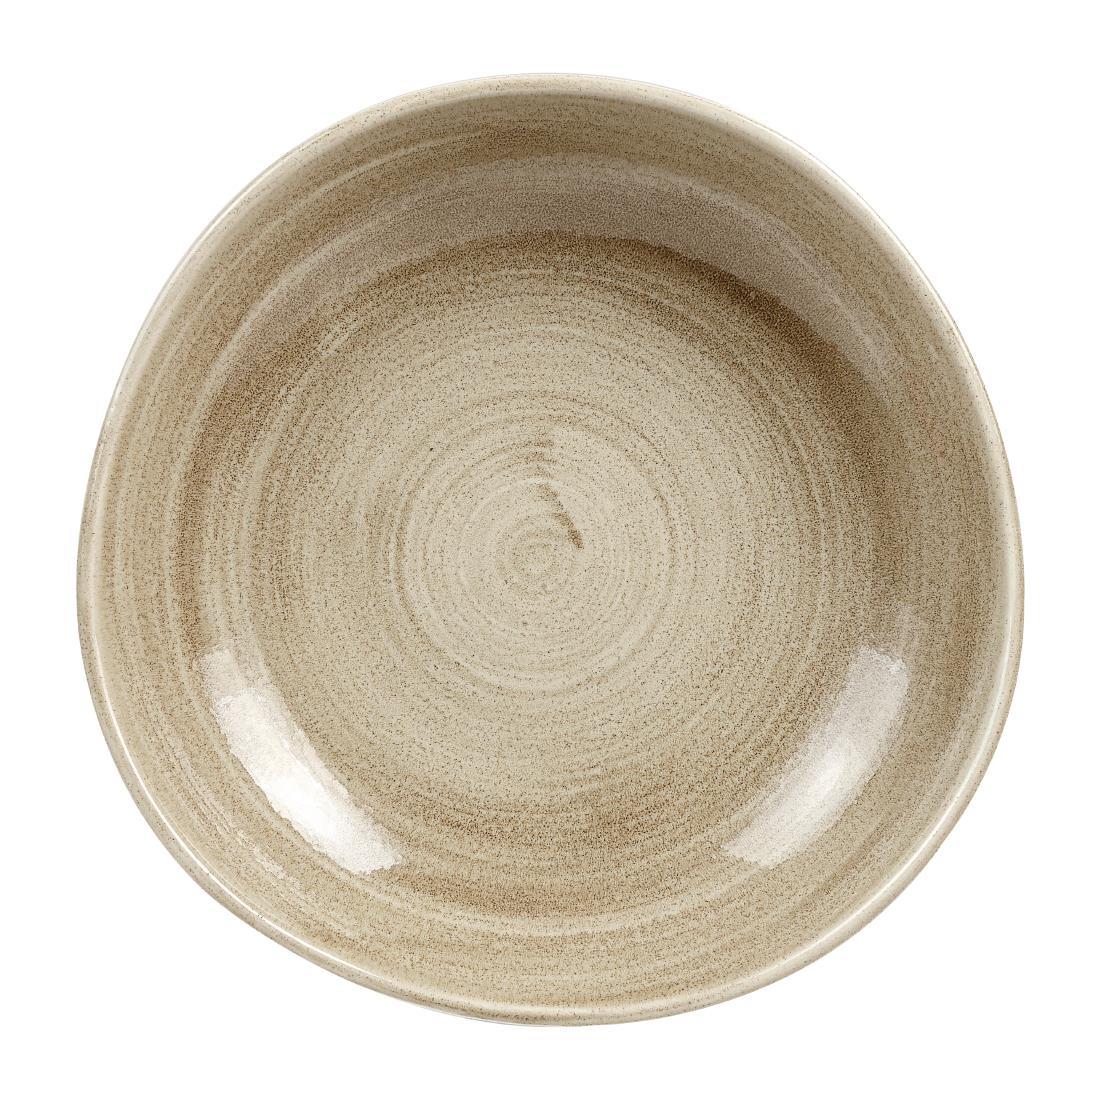 Churchill Stonecast Patina Antique Organic Round Bowls Taupe 253mm (Pack of 12) - HC804  - 2